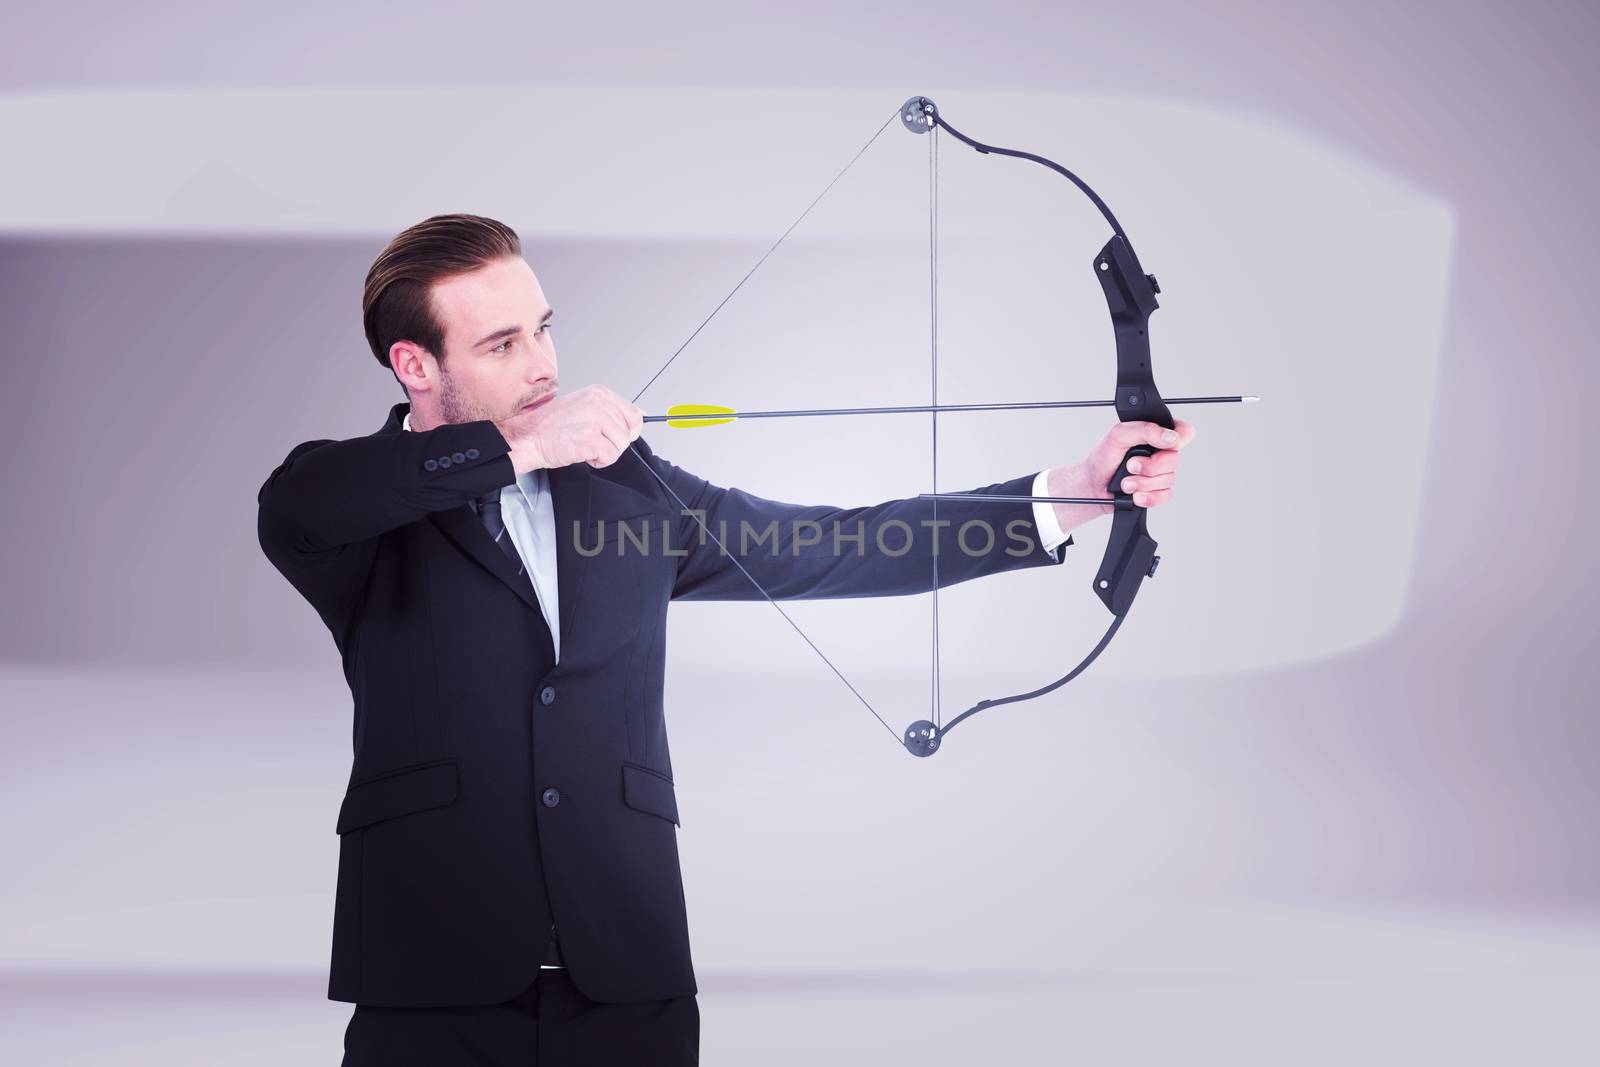 Composite image of businessman shooting a bow and arrow by Wavebreakmedia